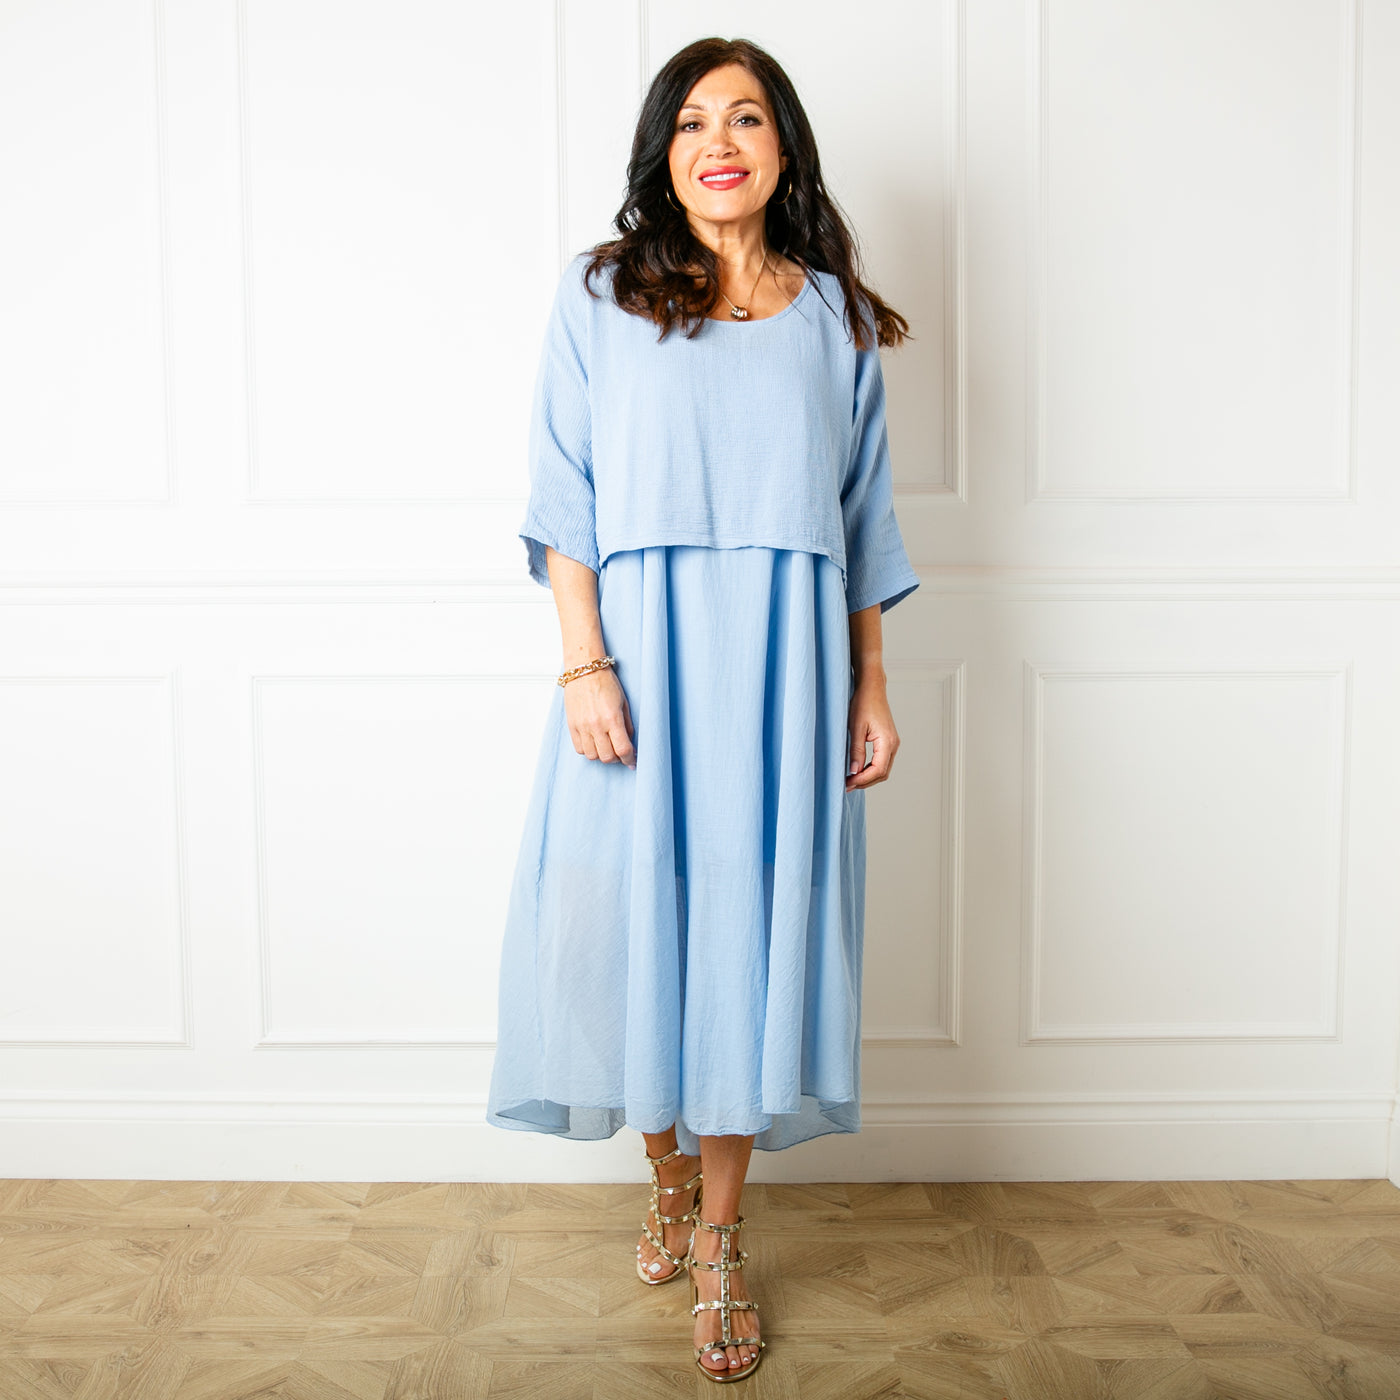 The dusky blue Two Piece Dress with a midi dress that has straps, a round neckline and a lining underneath